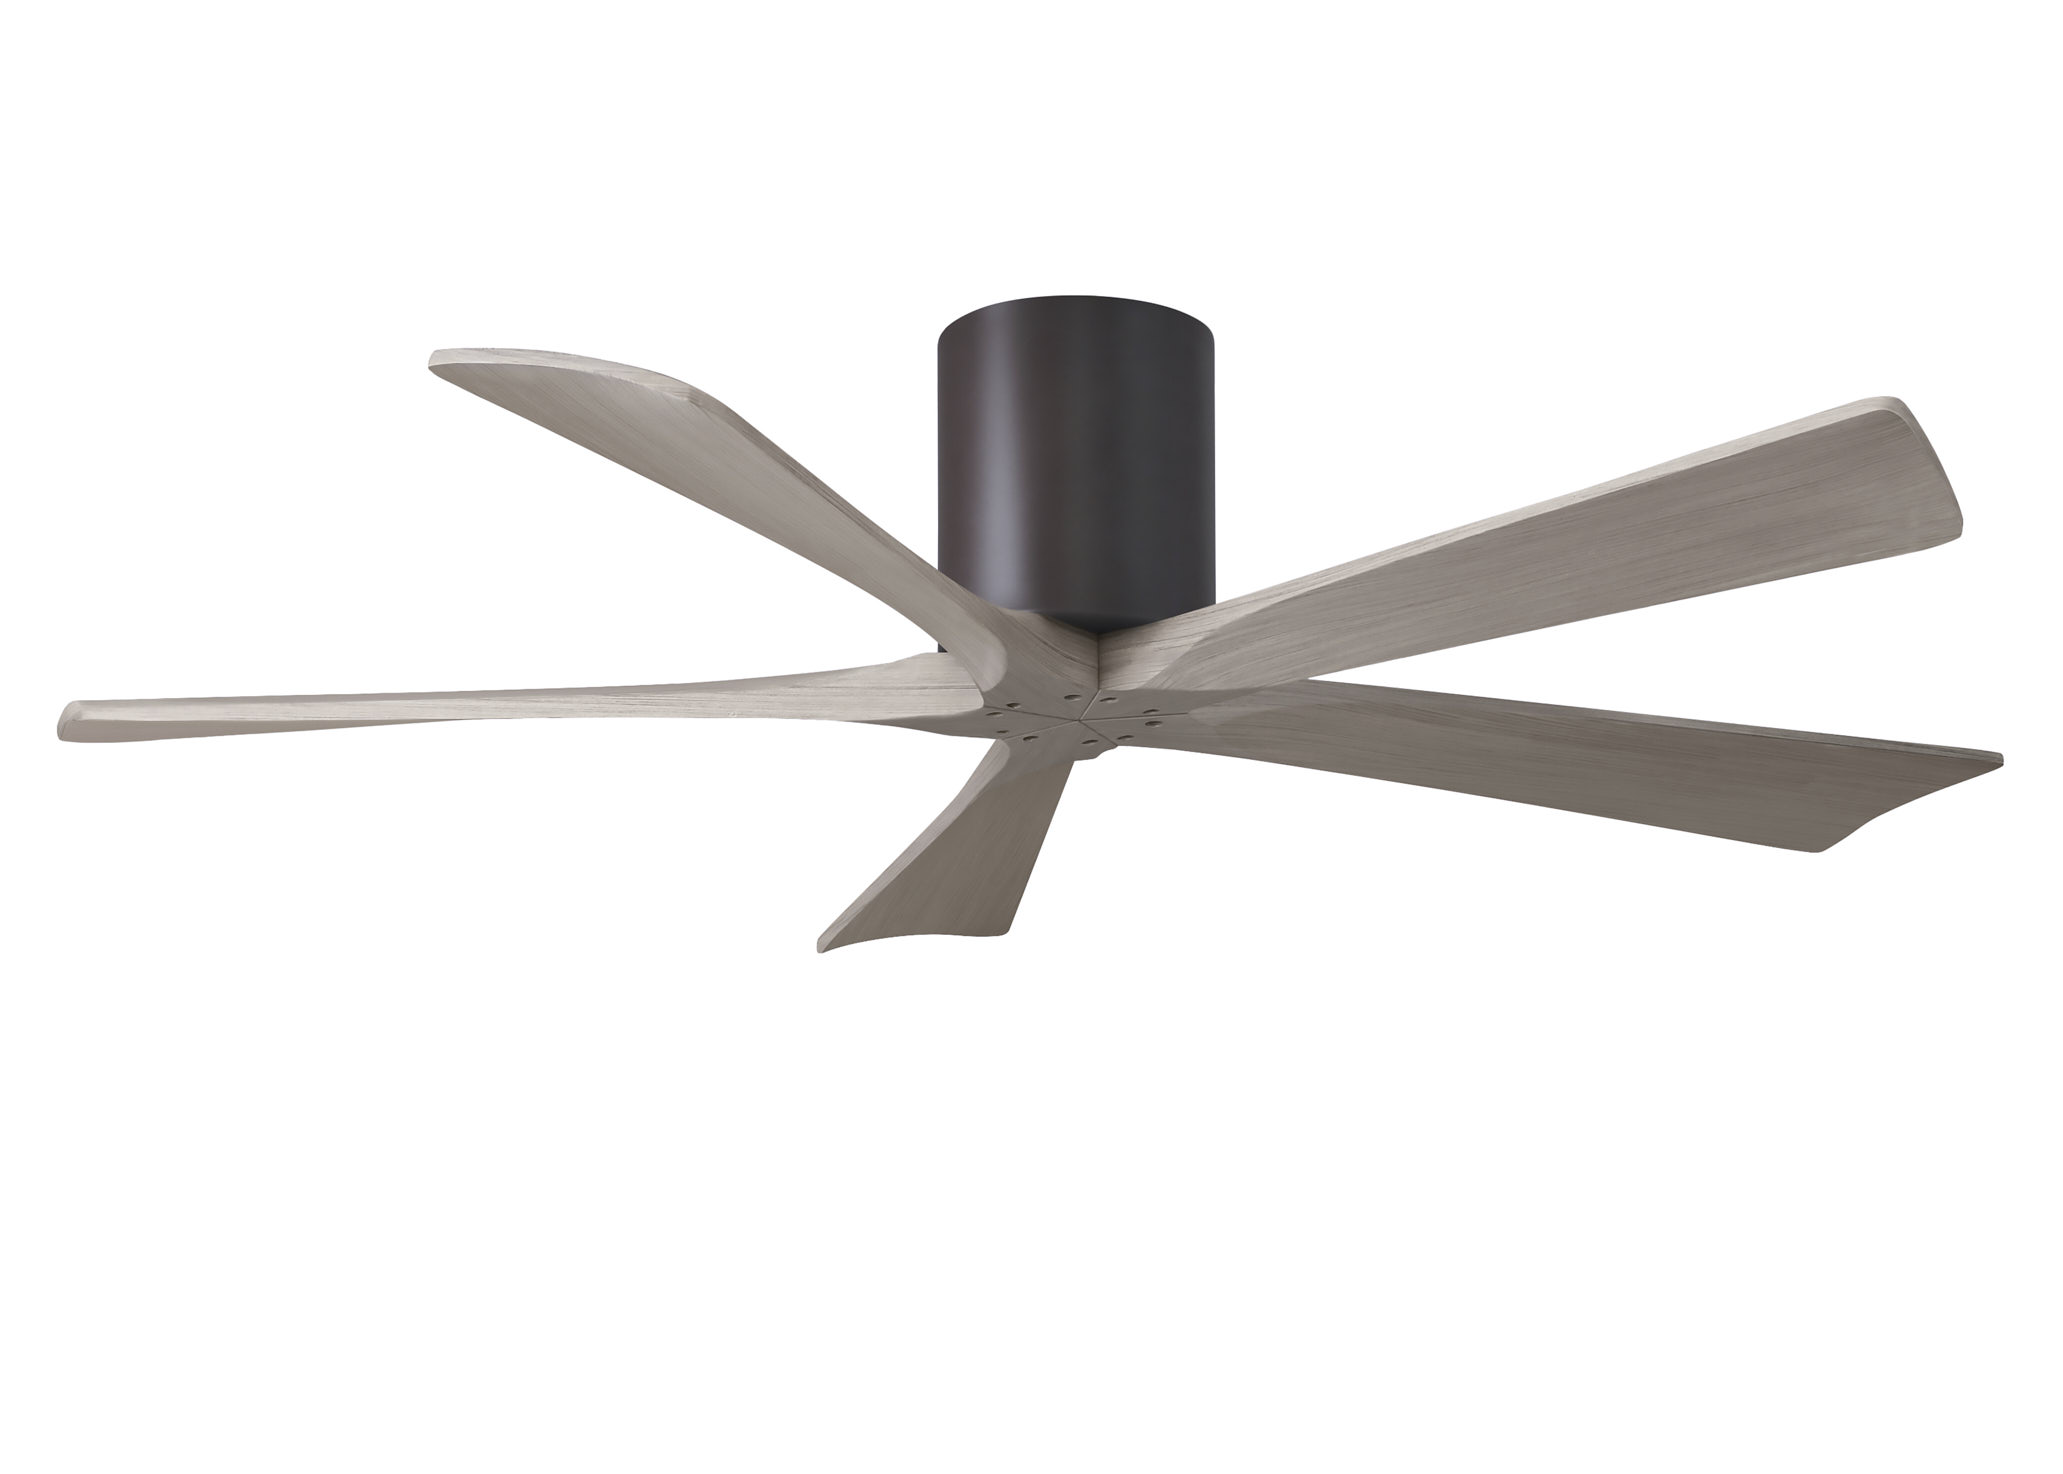 Irene-5H 6-speed ceiling fan in textured bronze finish with 52